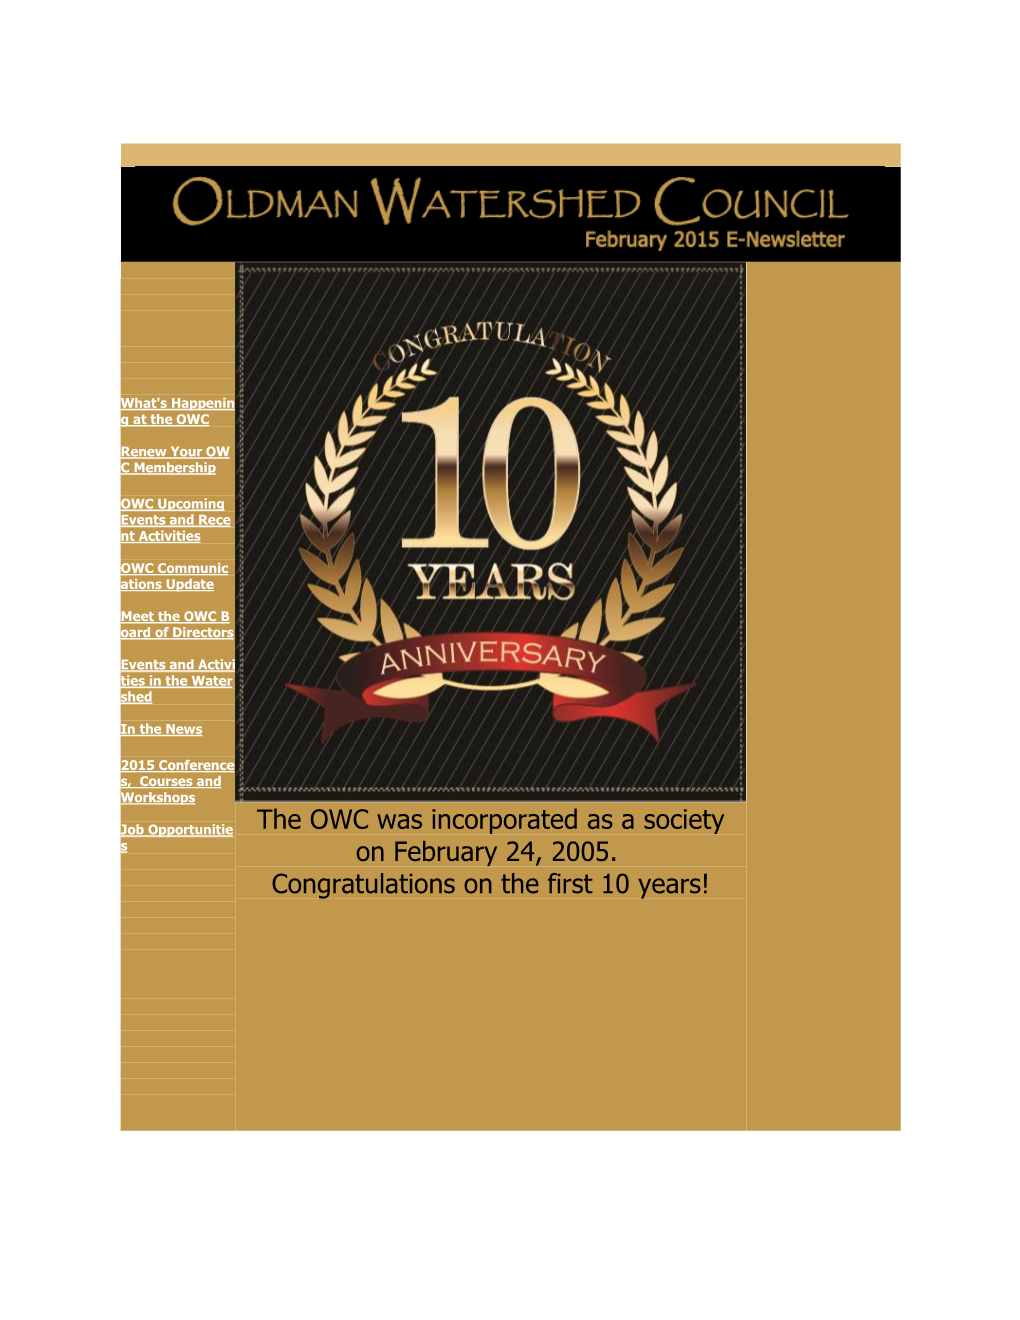 The OWC Was Incorporated As a Society on February 24, 2005. Congratulations on the First 10 Years!